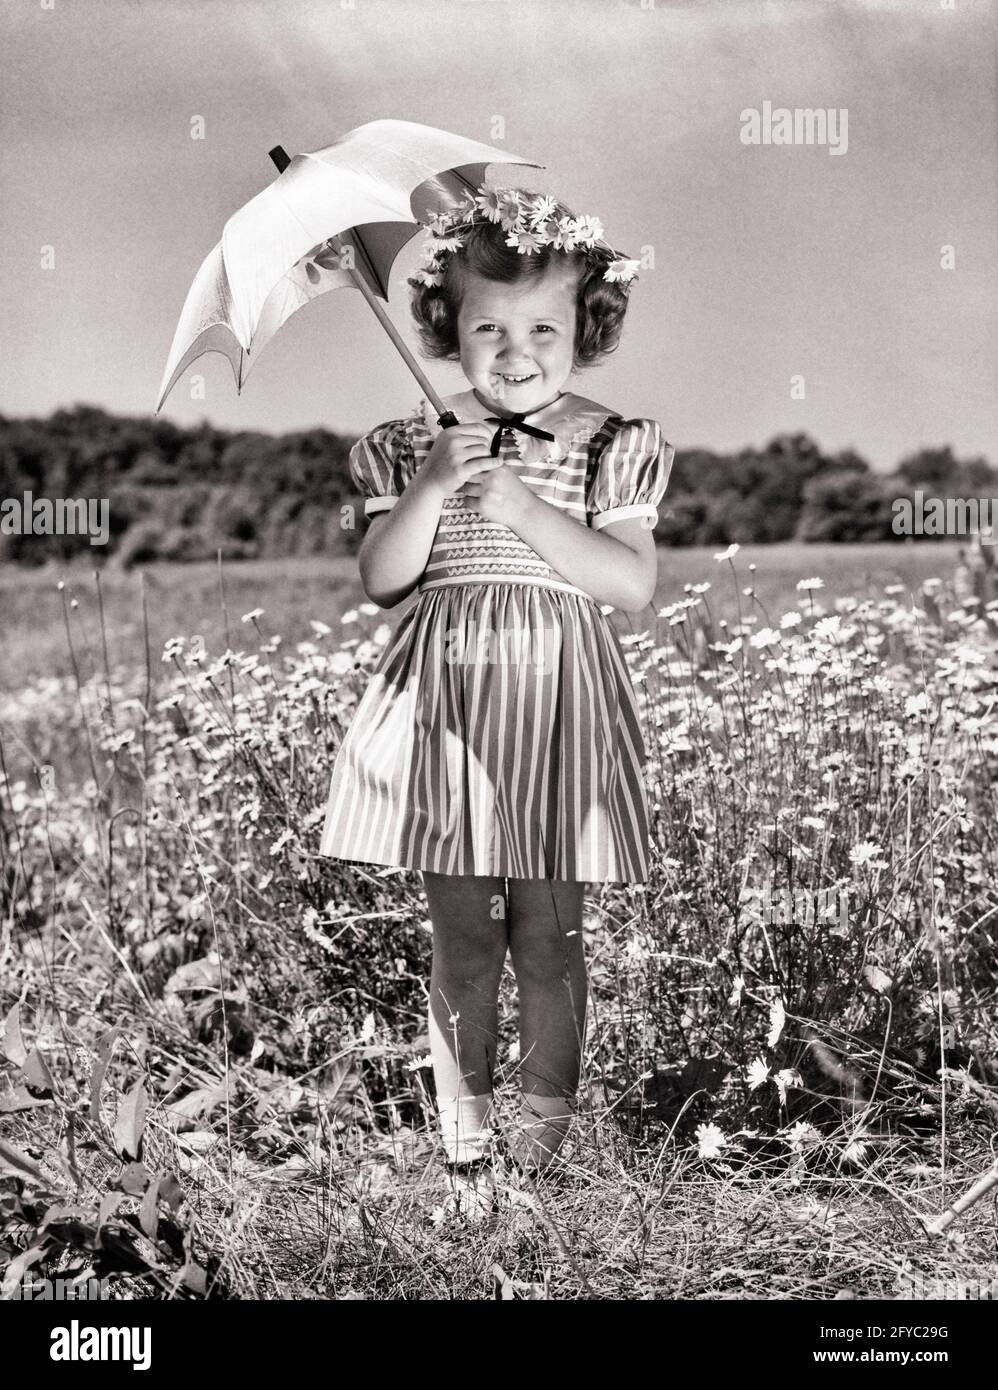 1940s 1950s SMILING GIRL UNDER PARASOL STANDING IN FIELD OF DAISIES WEARING  STRIPED DRESS FLOWERS IN HER HAIR LOOKING AT CAMERA - j1894 HAR001 HARS JOY  LIFESTYLE SATISFACTION FEMALES STRIPED RURAL HEALTHINESS